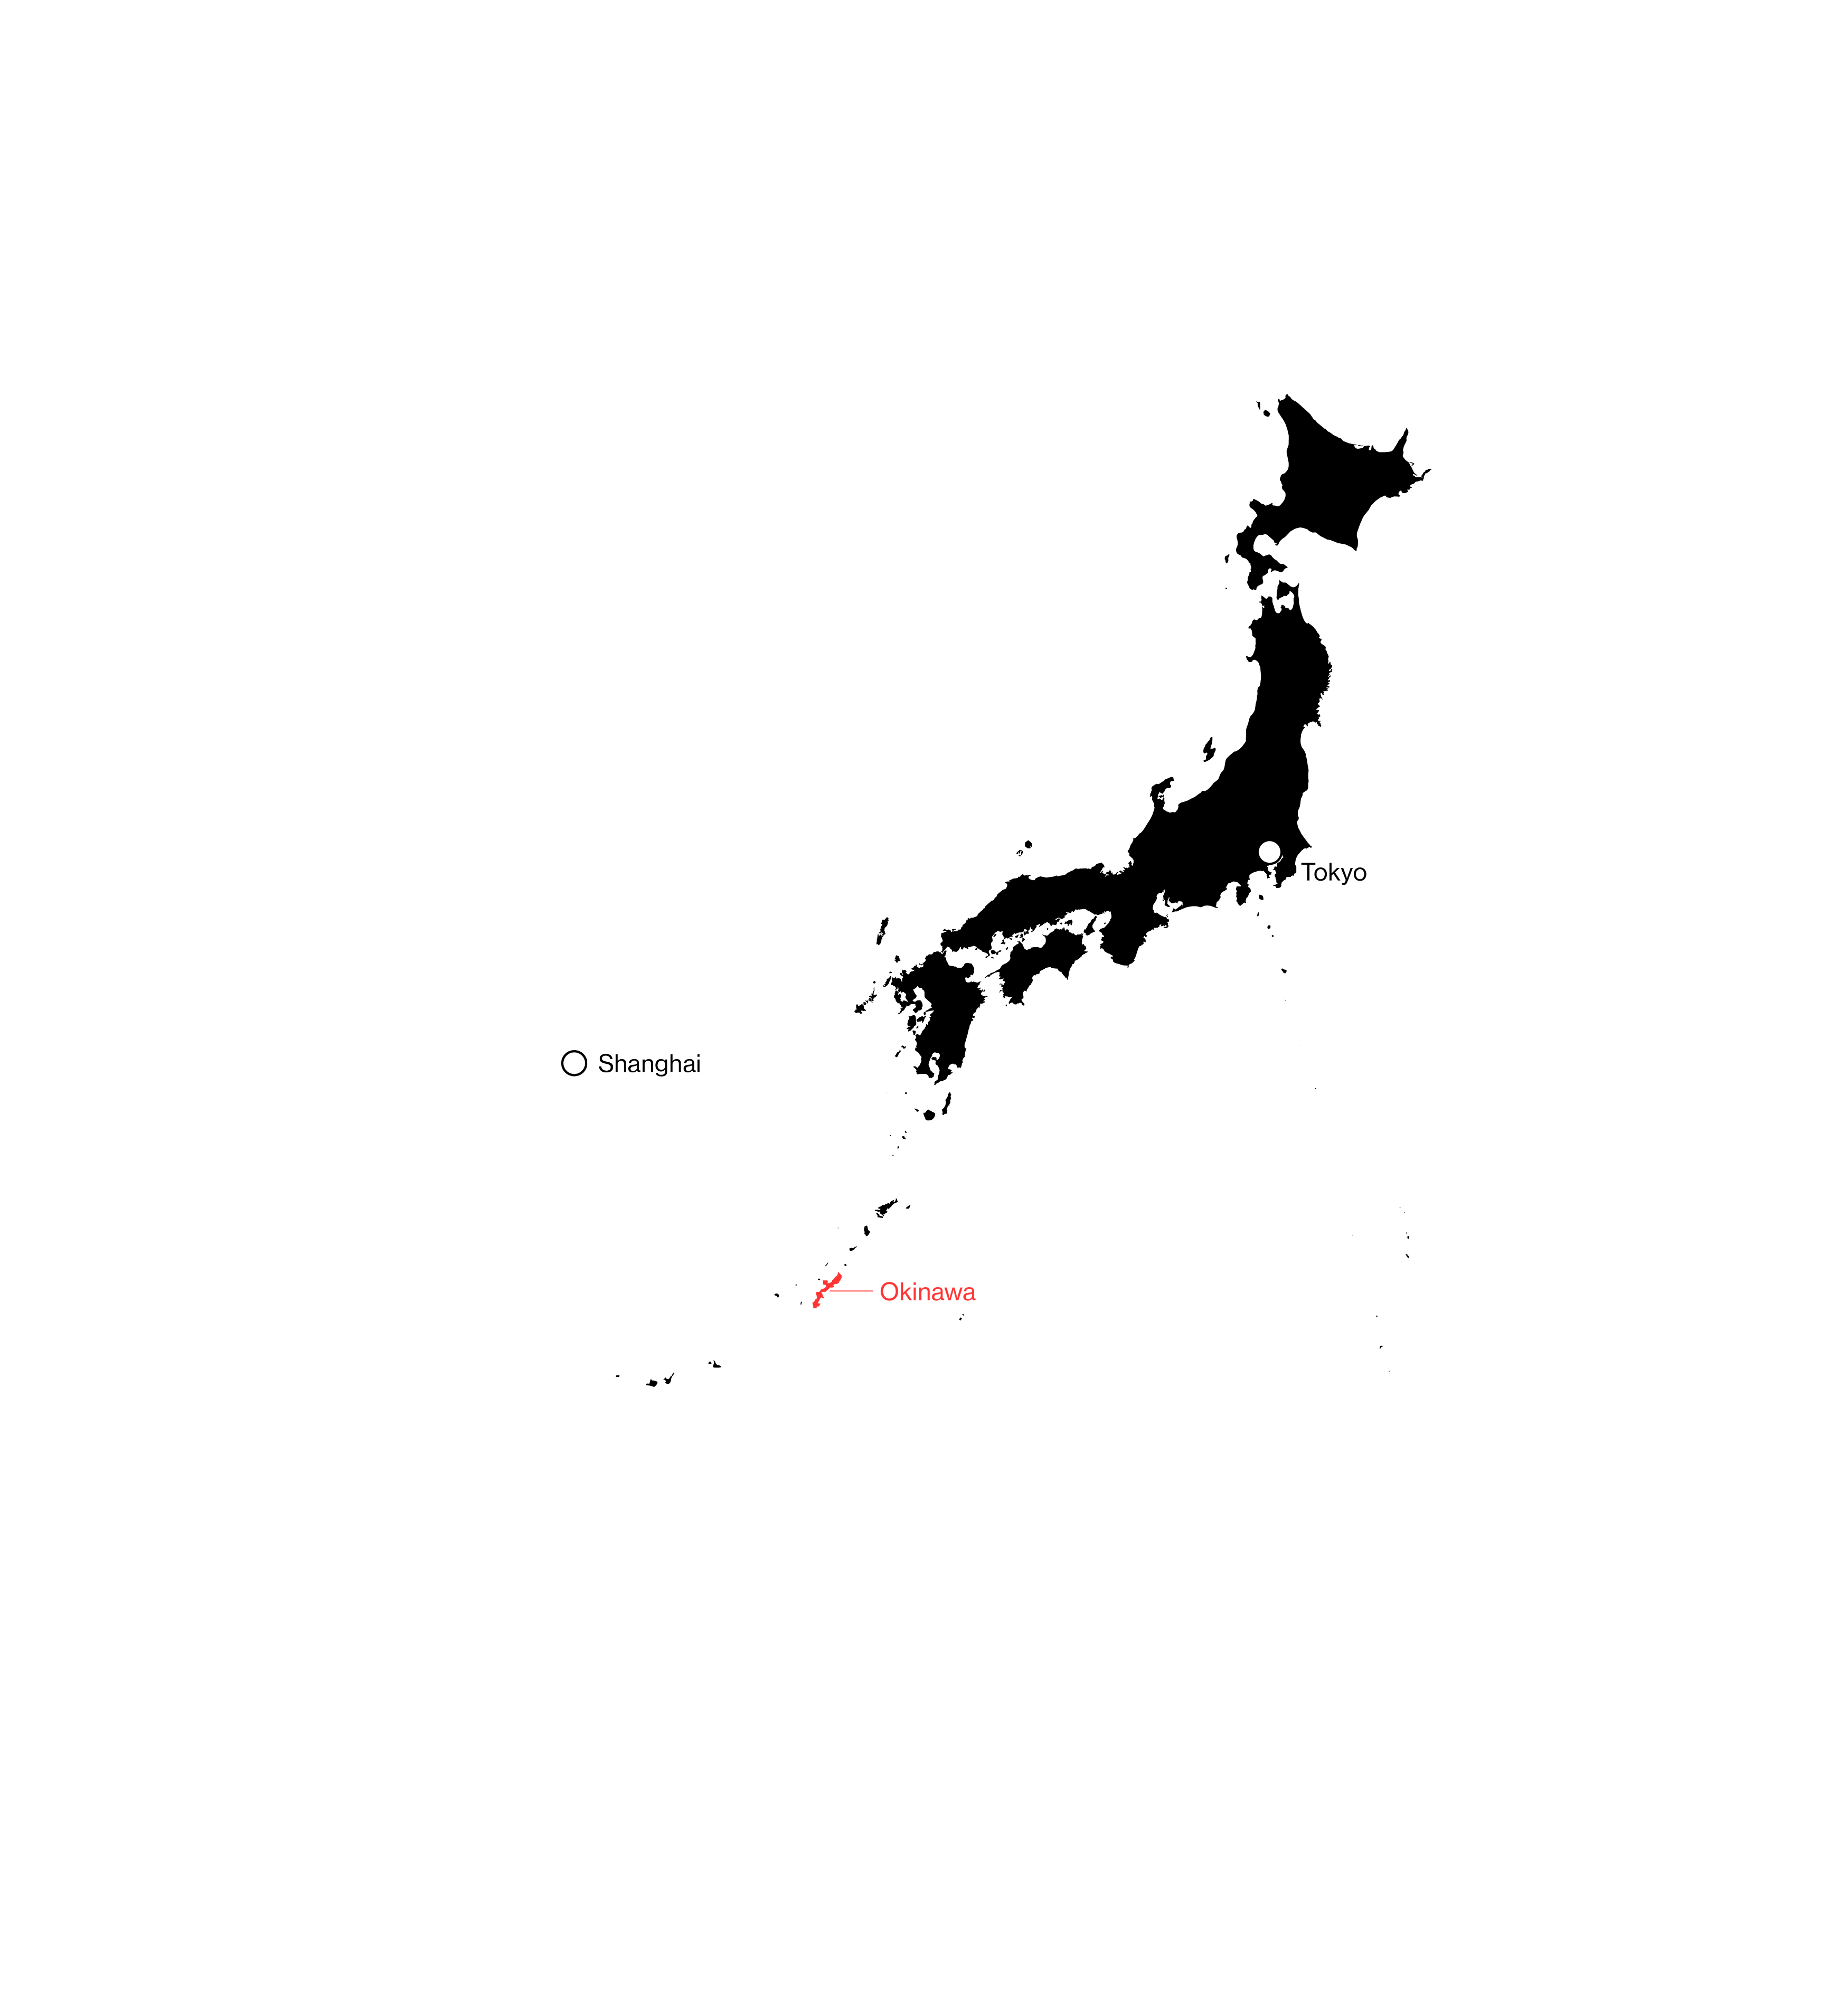 Map showing the Japanese island of Okinawa, in proximity to Shanghai, China.